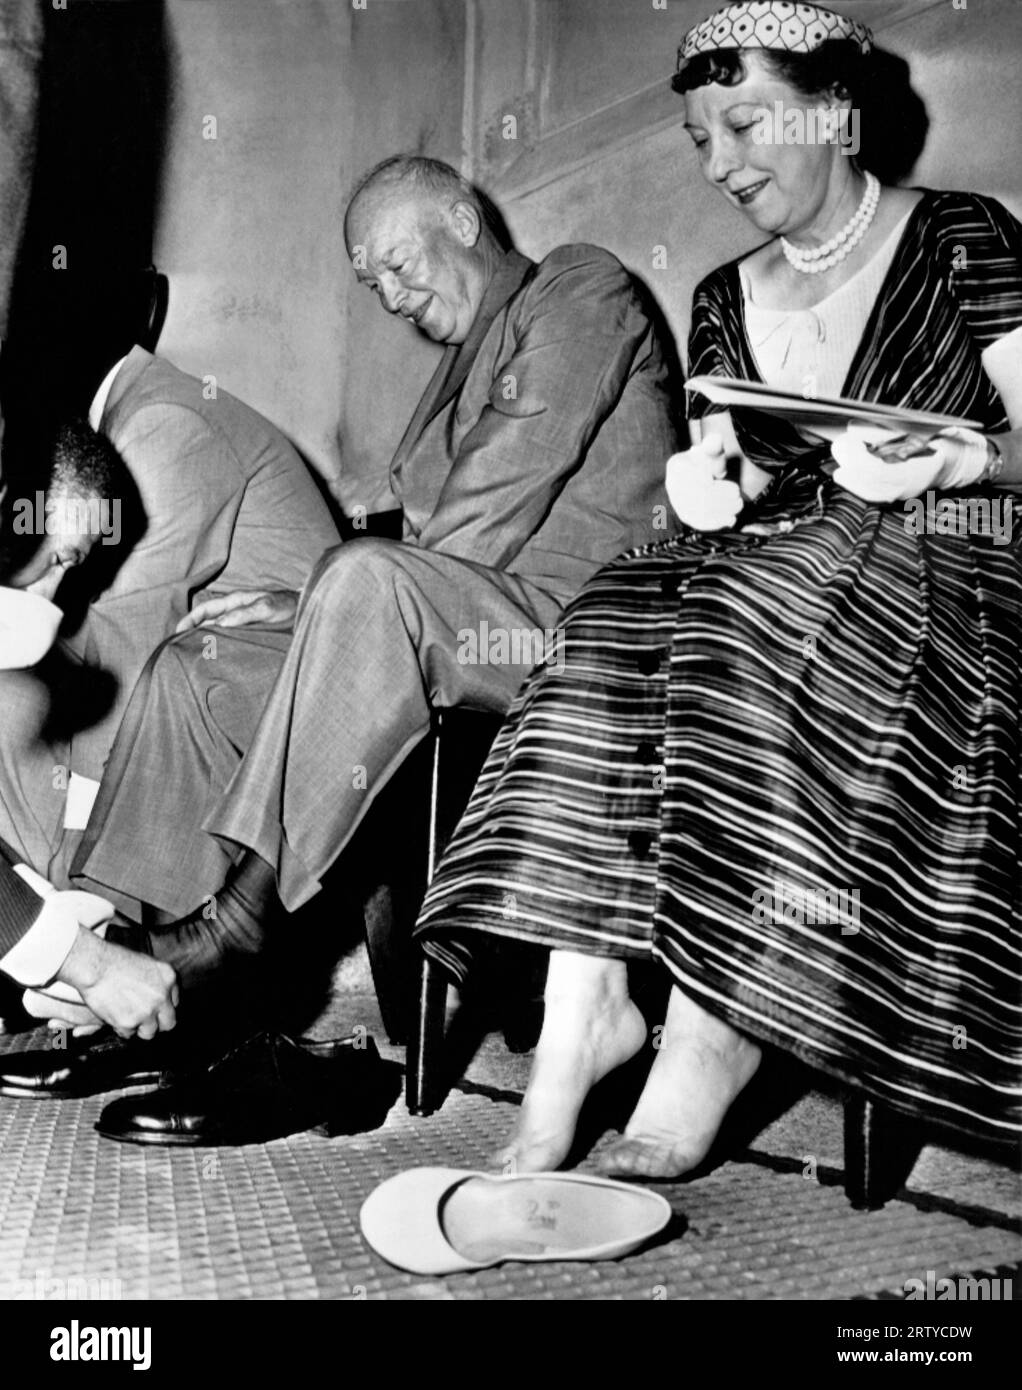 Washington, D.C.  June 28, 1957. President Eisenhower and the First Lady conform to Moslem custom and remove their shoes for a tour of the new Islamic mosque which they helped to dedicate here today, Stock Photo